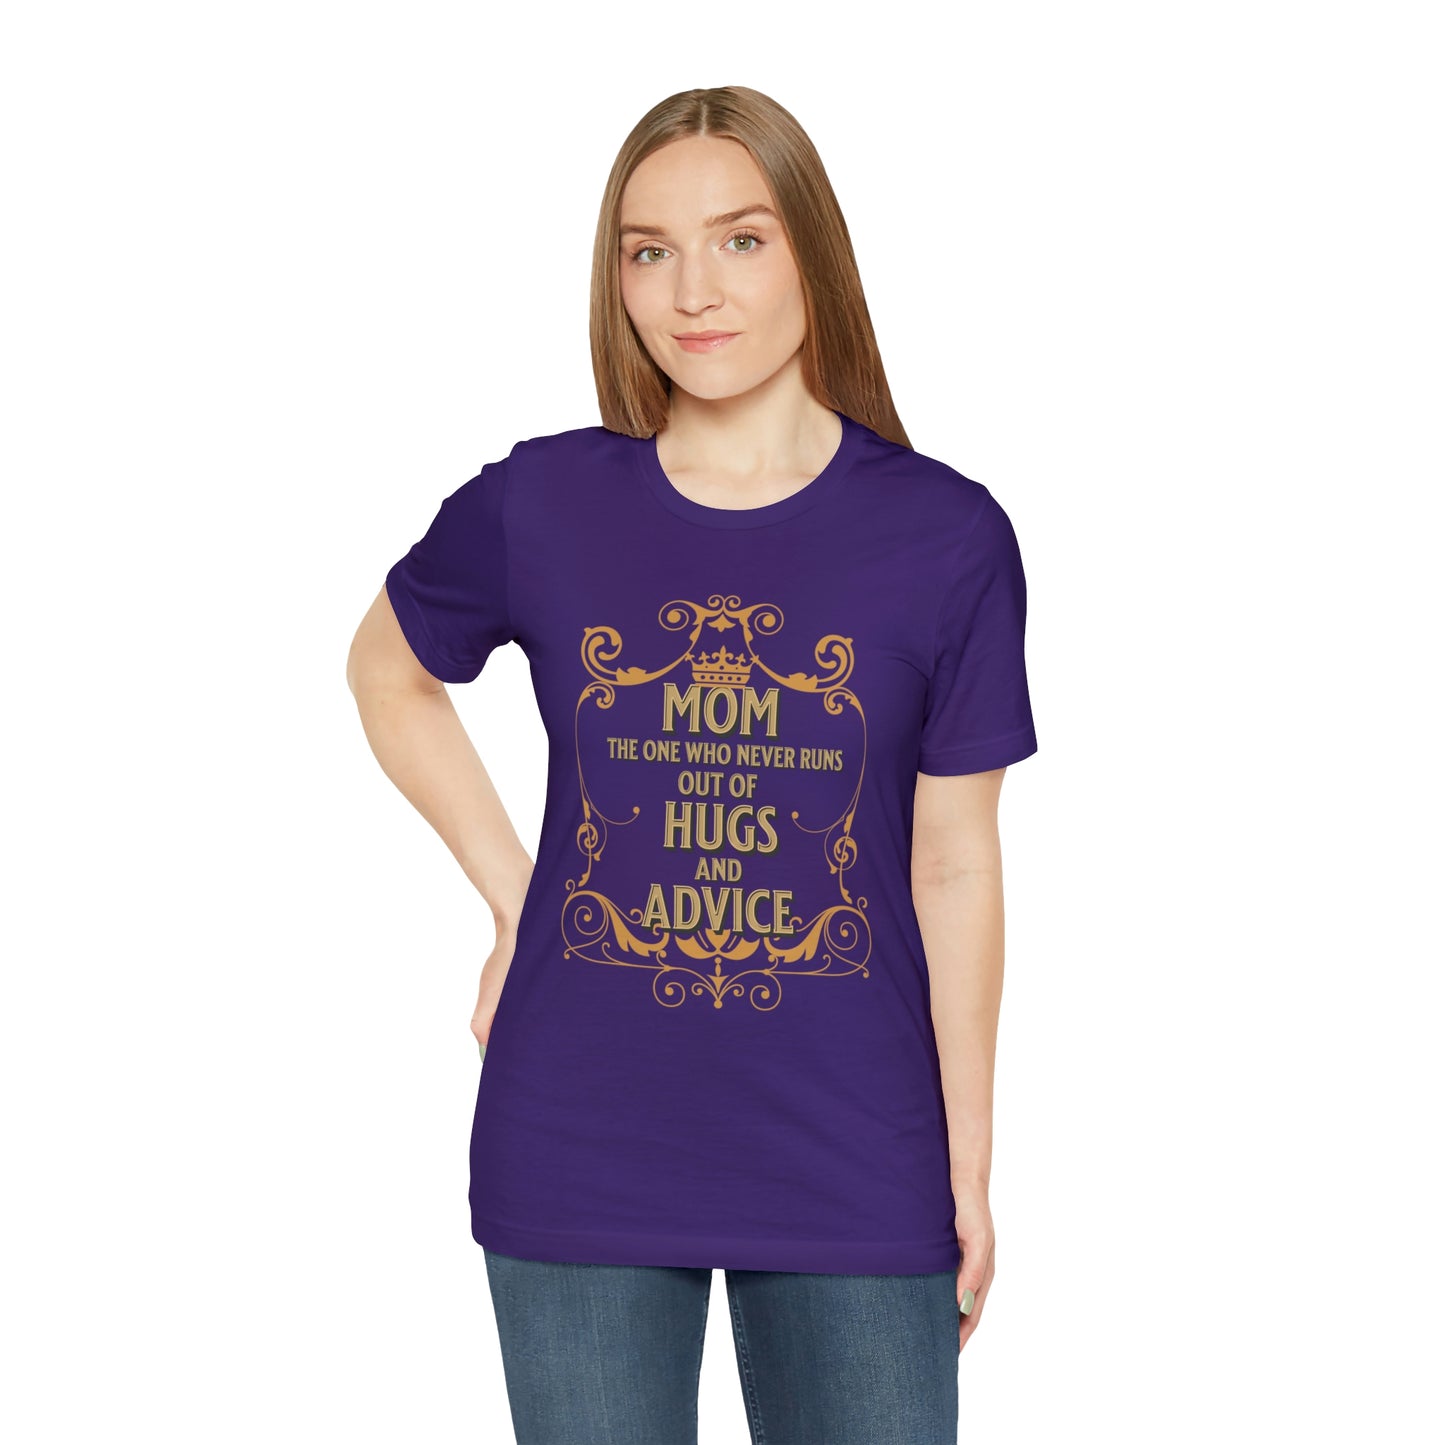 Women's Softstyle Tee, Mom the One Who Never Runs Out of Hugs and Advice, Gift for Mom